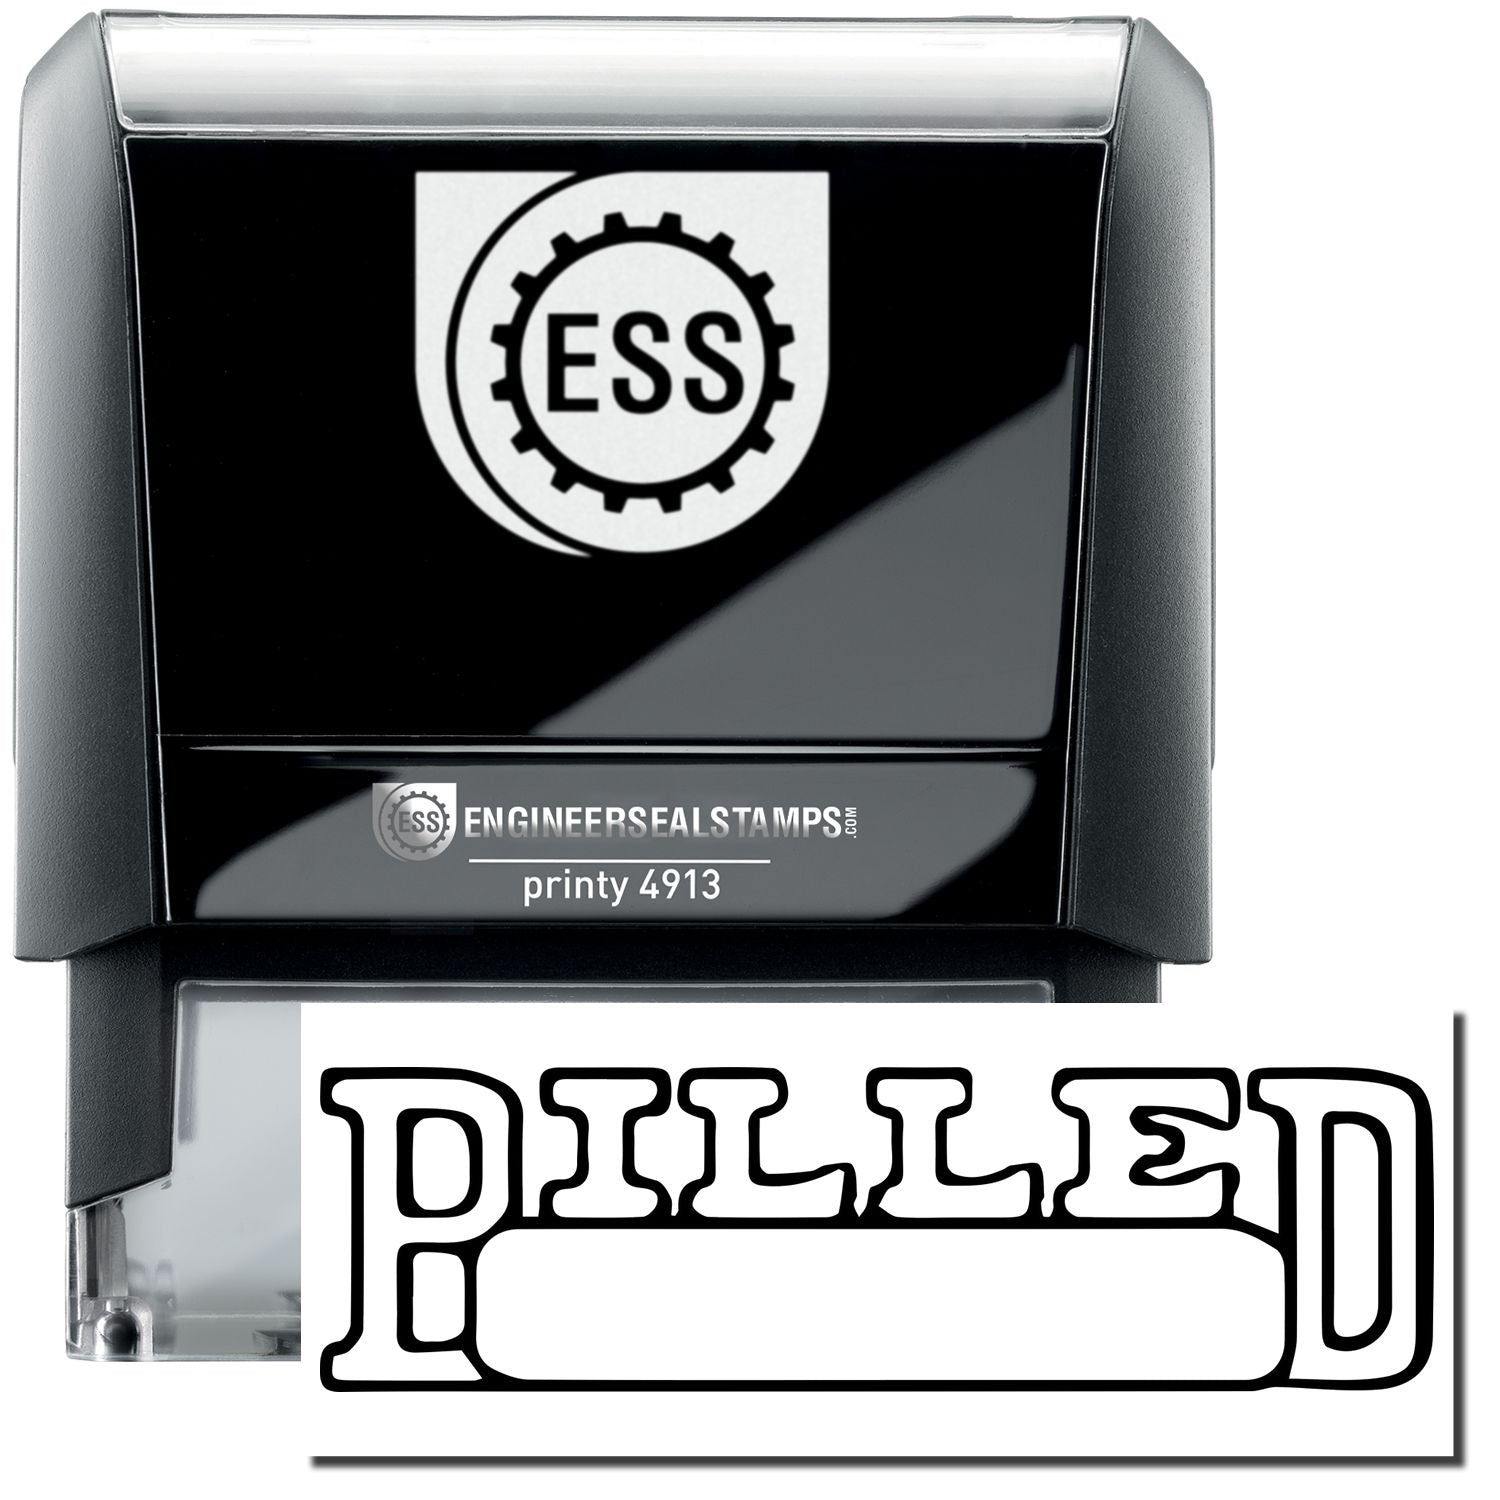 A self-inking stamp with a stamped image showing how the text "BILLED" in a large outline font with a date box is displayed by it after stamping.